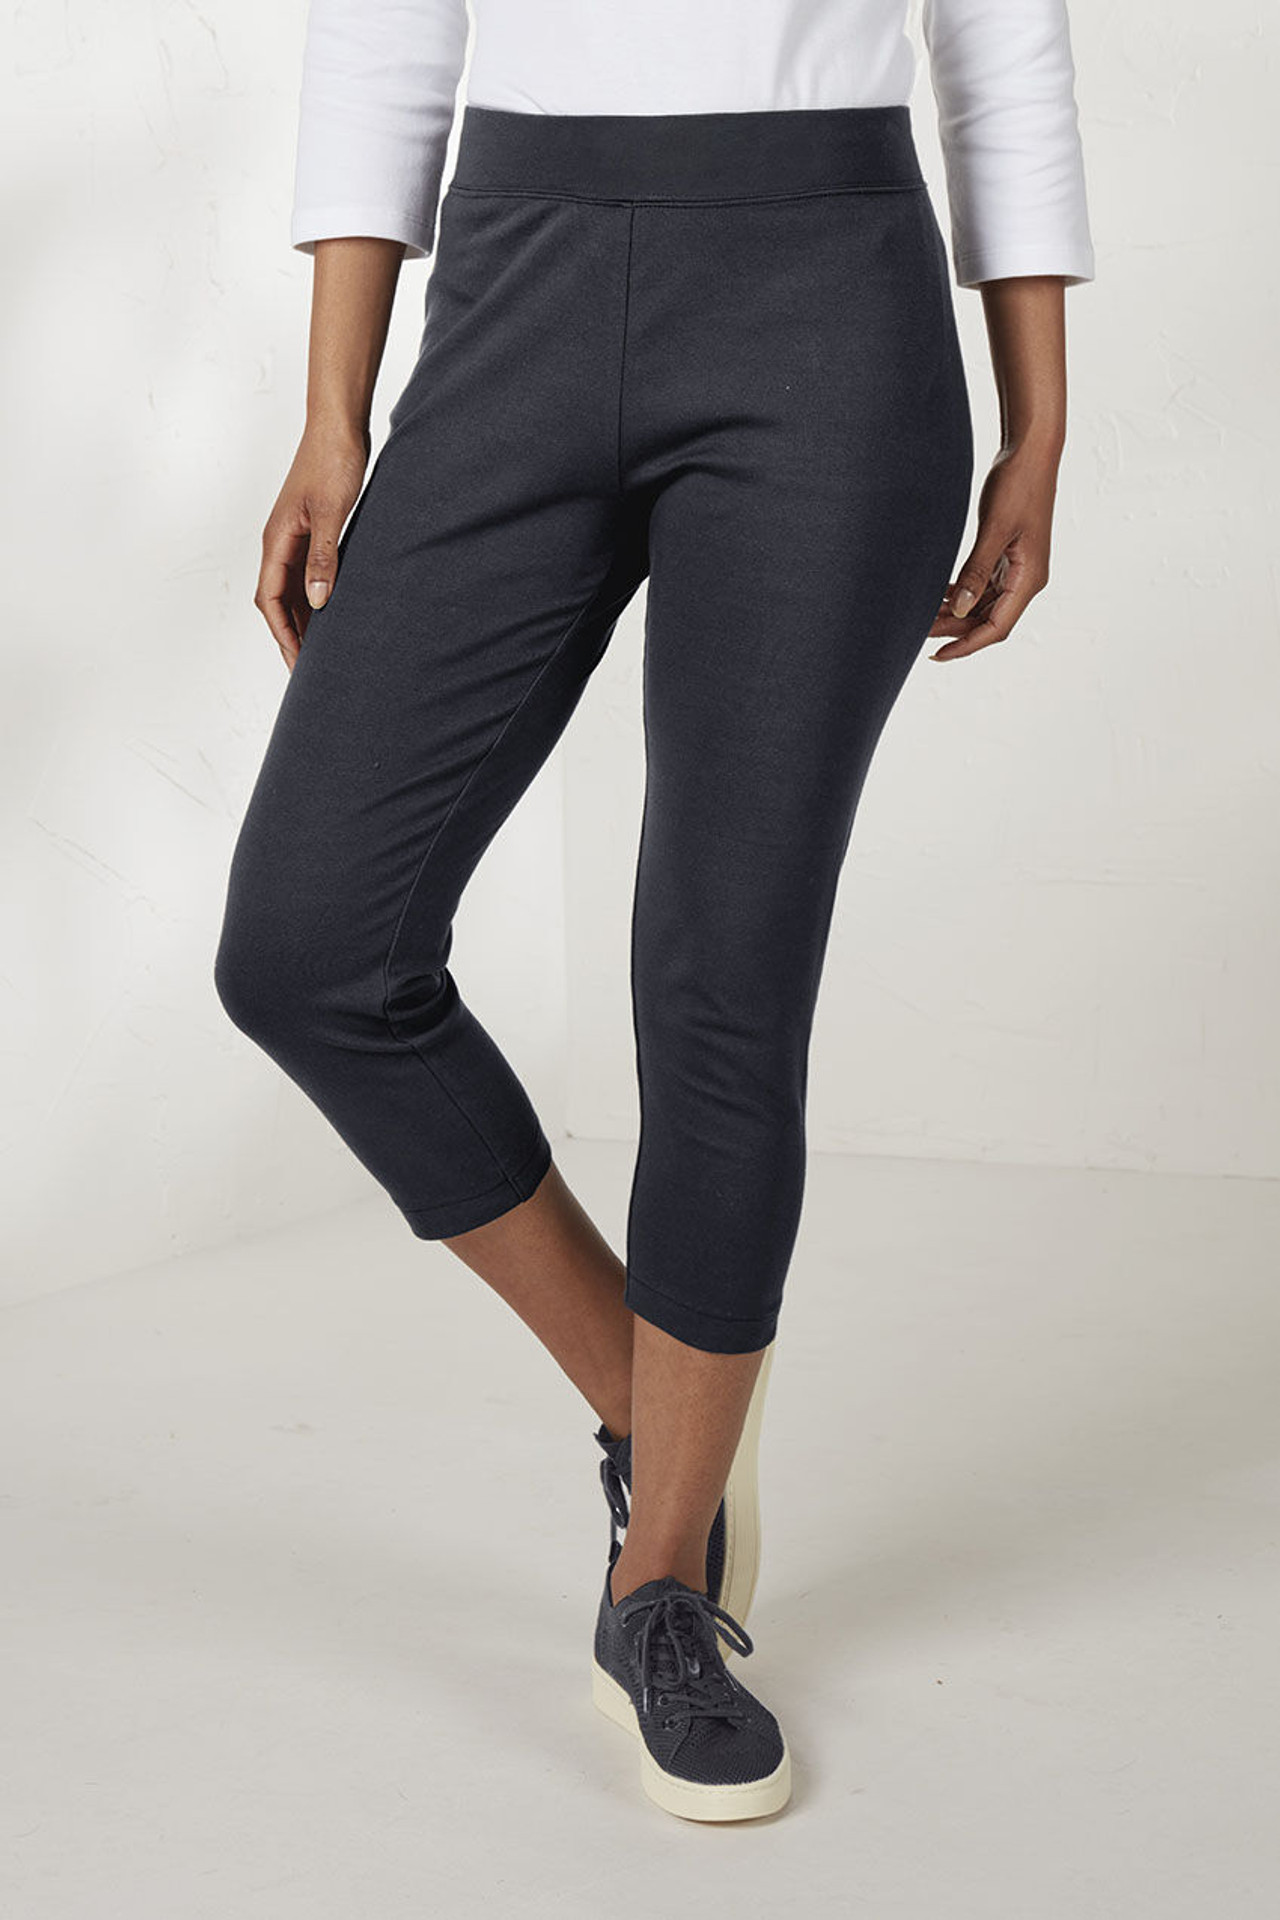 Women's Comfort Jogger Pants – Fitkin